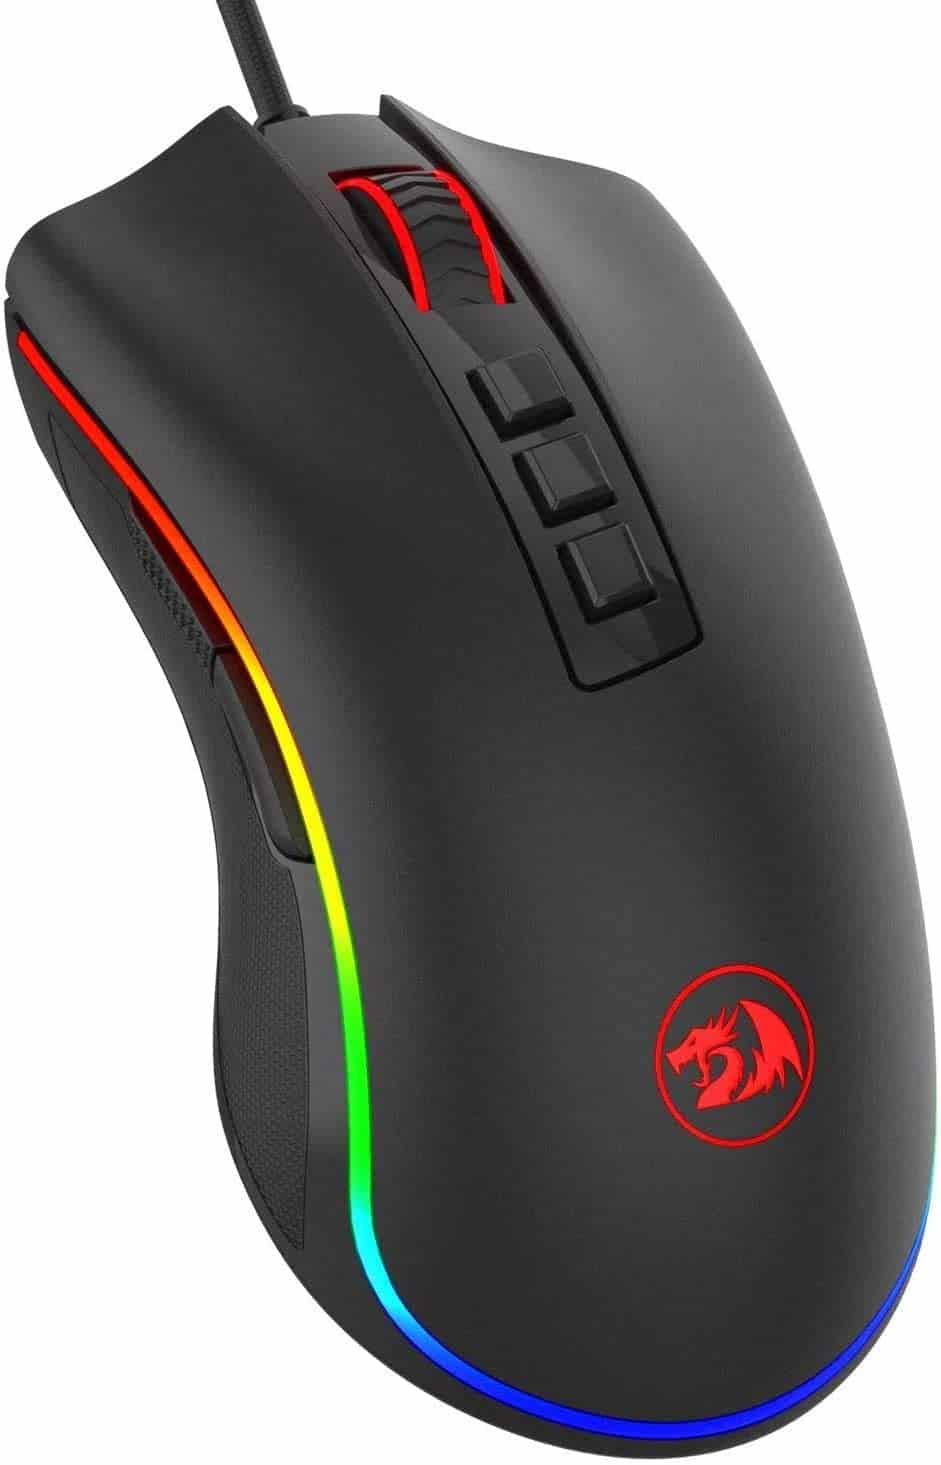 Best budget drag clicking mouse - Redragon M711